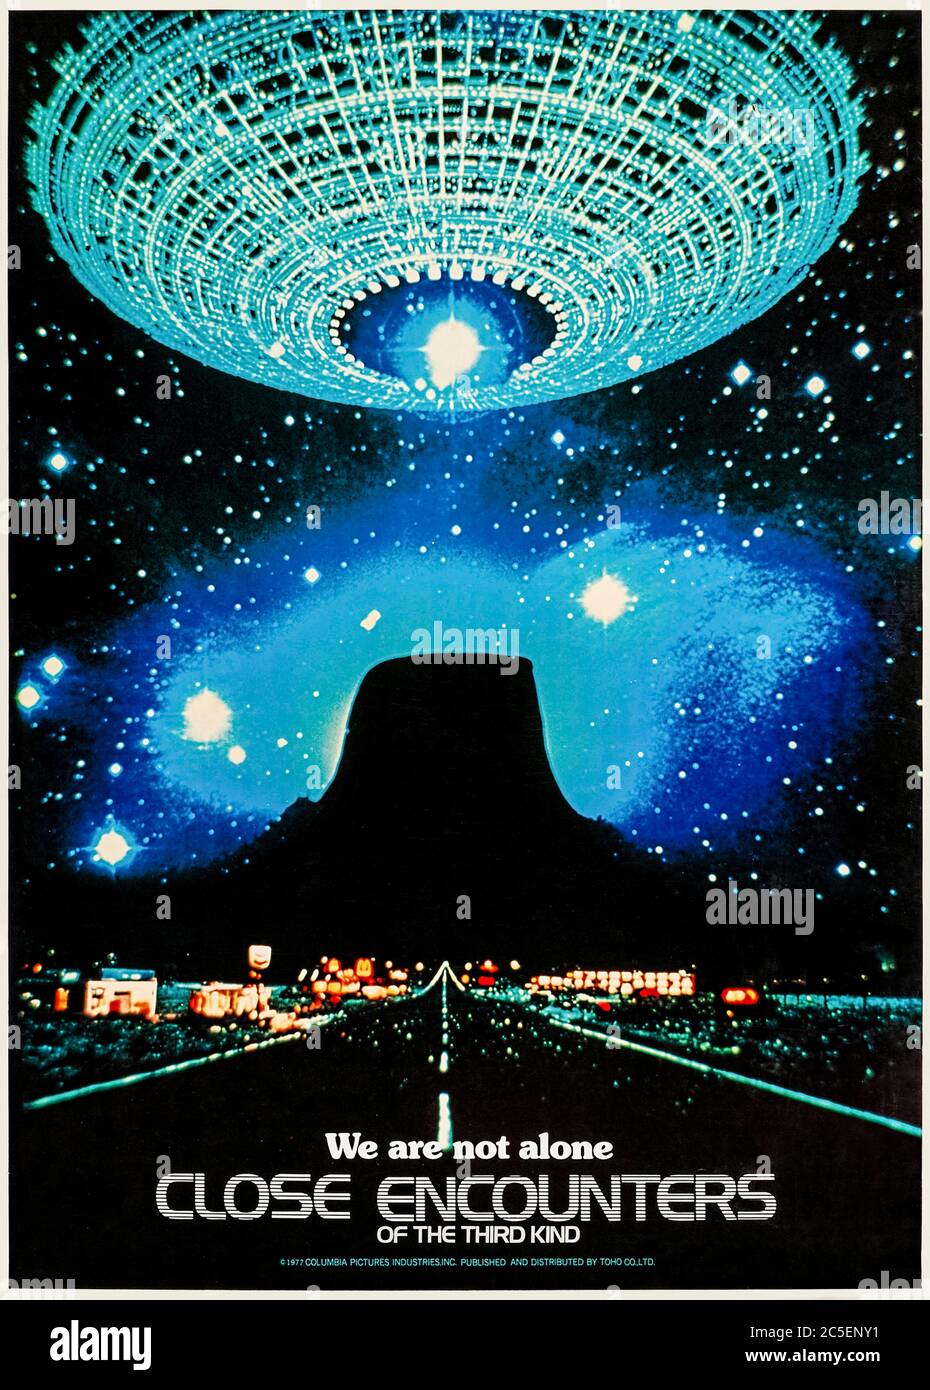 Close Encounters of the Third Kind (1977) directed by Steven Spielberg and starring Richard Dreyfuss, François Truffaut and Teri Garr. Contact with aliens and mash potato. Stock Photo